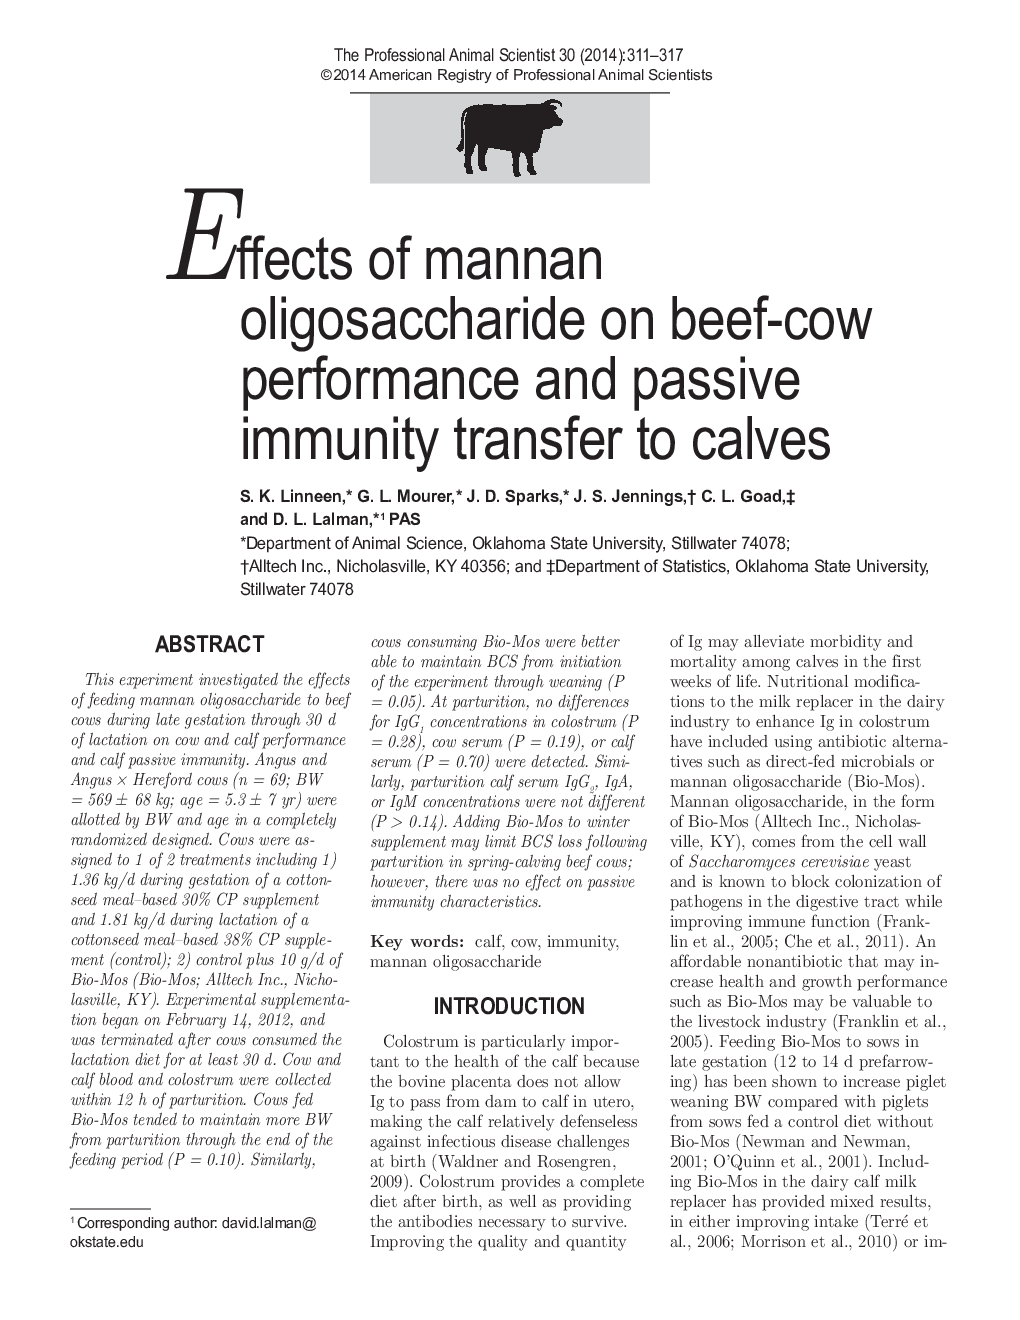 Effects of mannan oligosaccharide on beef-cow performance and passive immunity transfer to calves